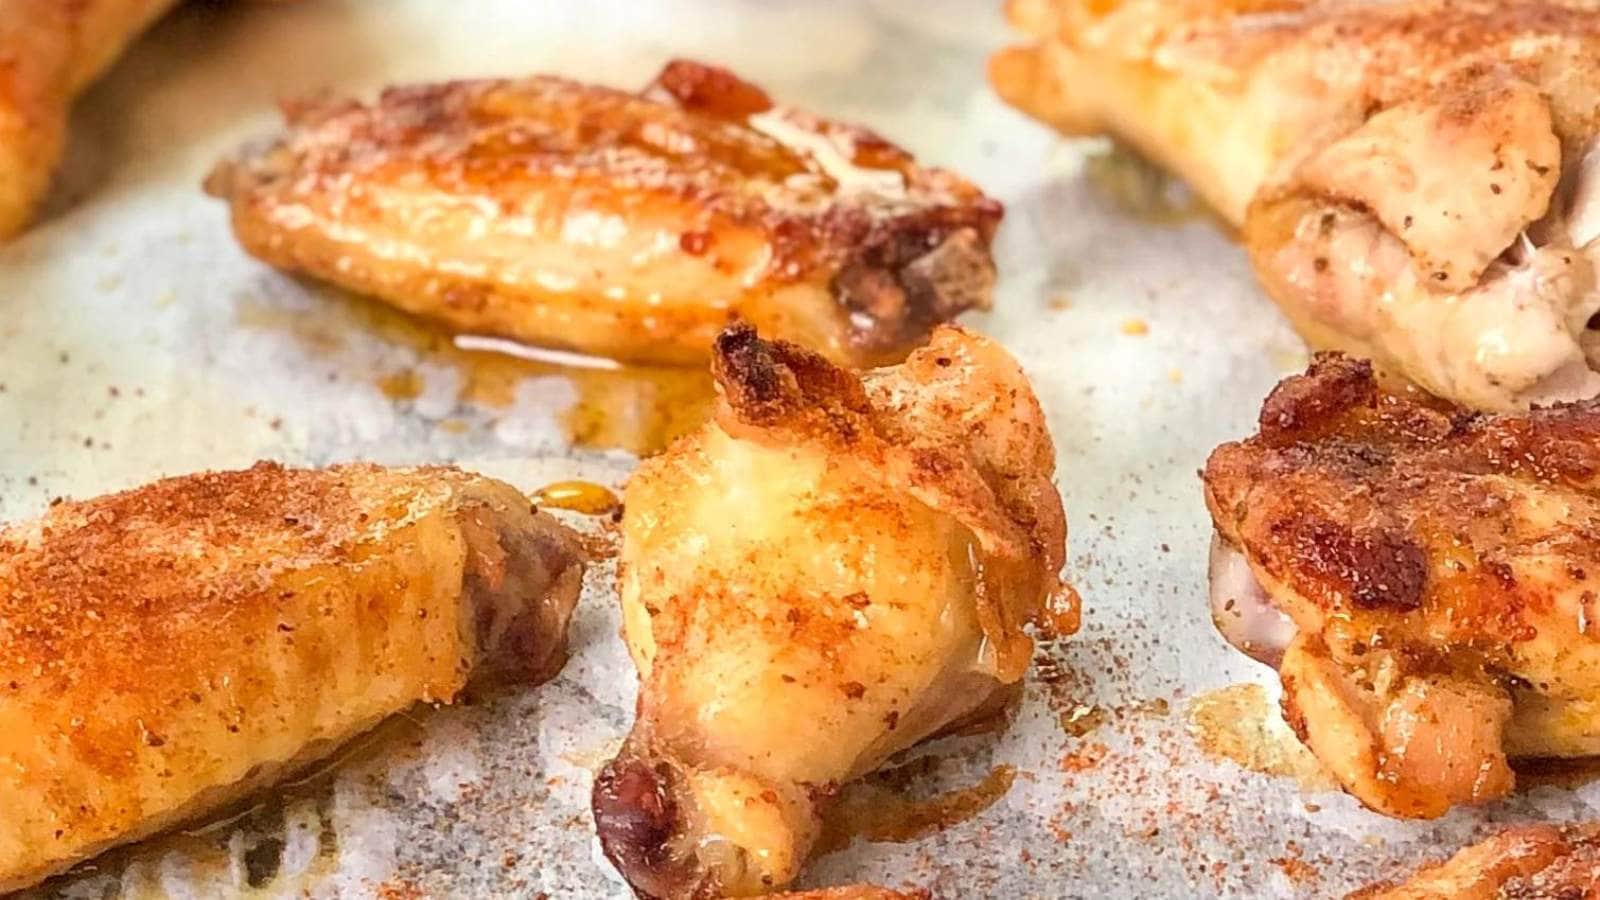 Paleo Old Bay Wings recipe by Marys Whole Life.